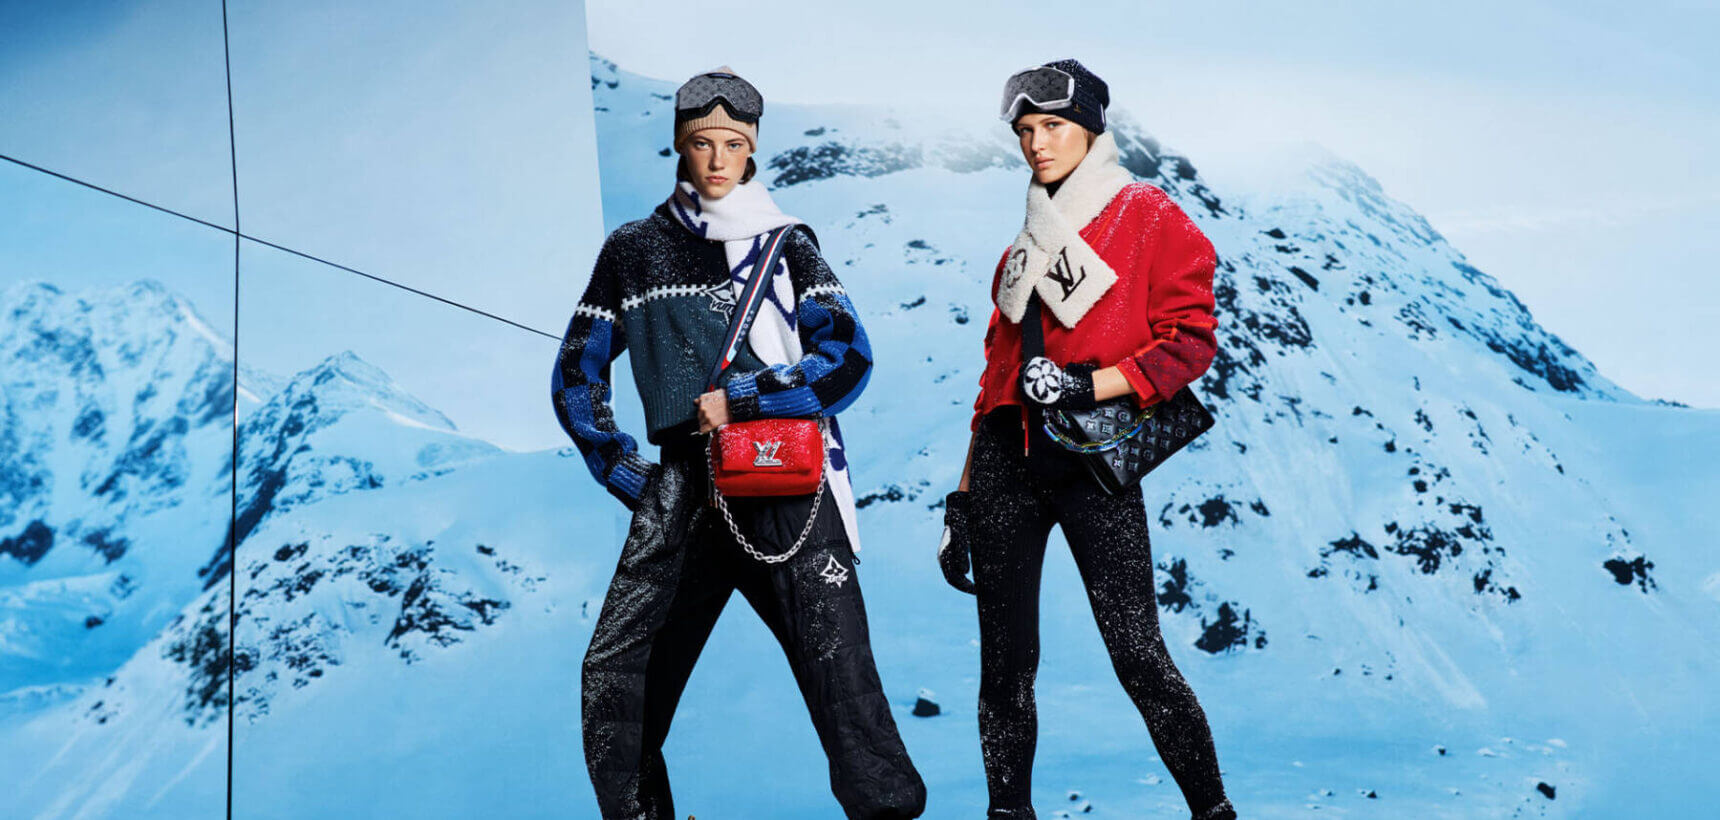 Louis Vuitton's Ski Capsule Collection is Now in Stores